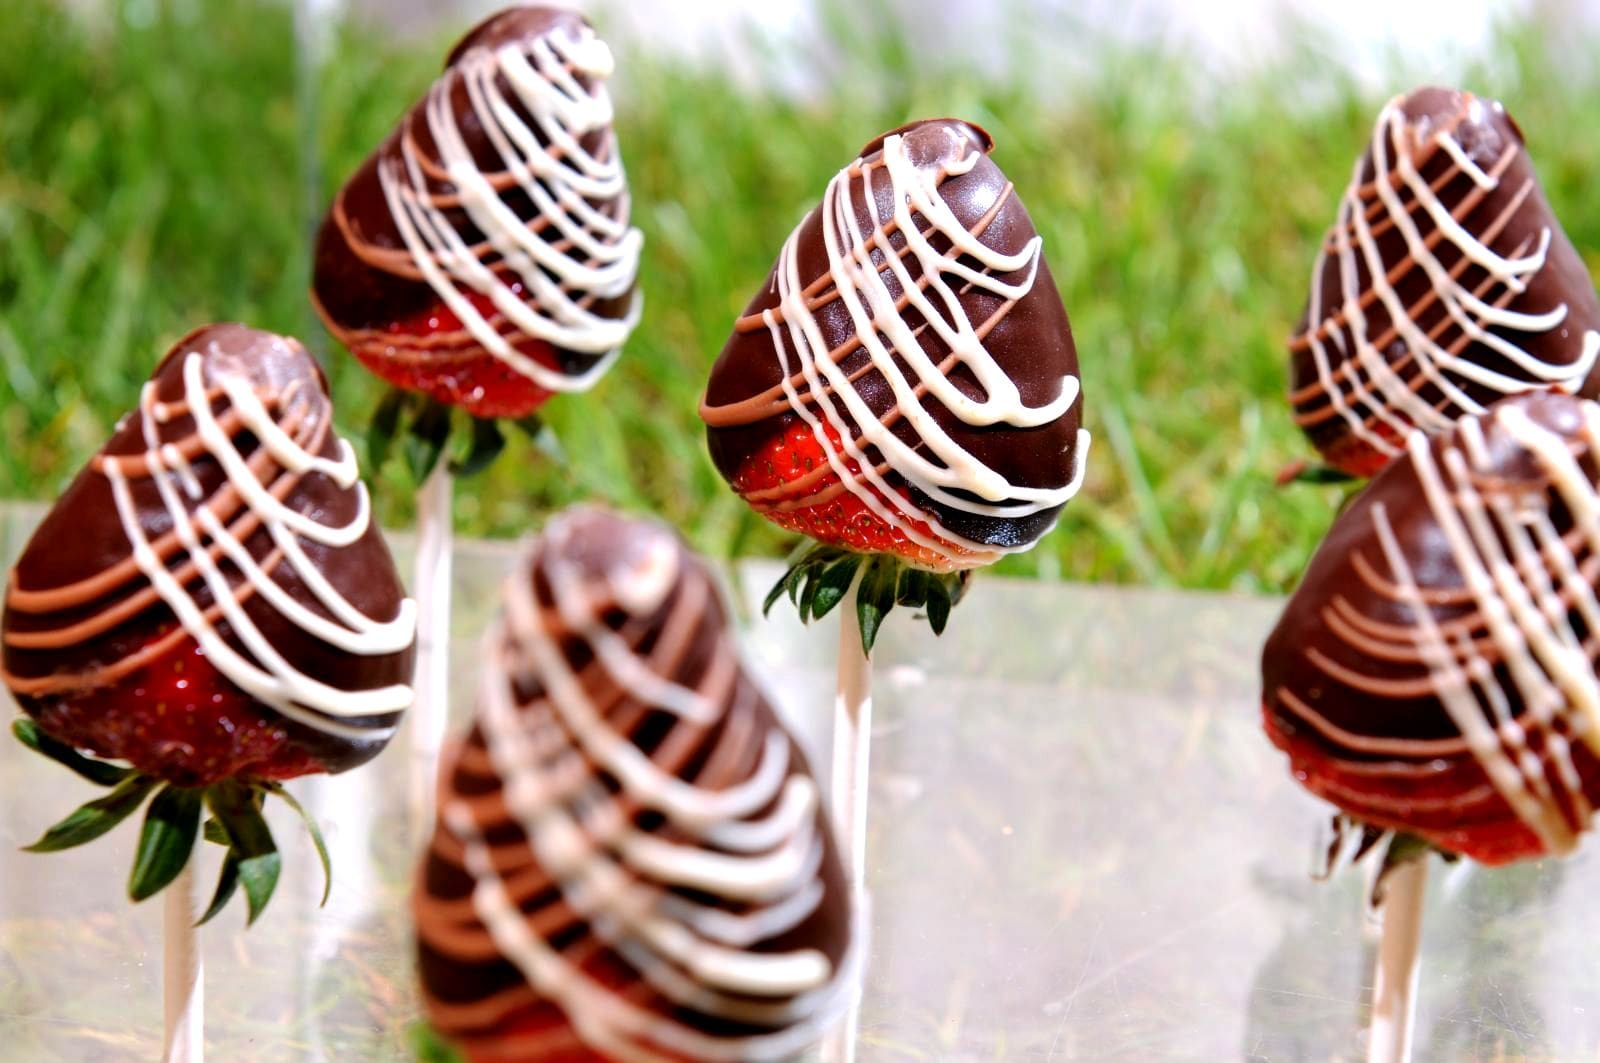 chocolate covered strawberries on a stick